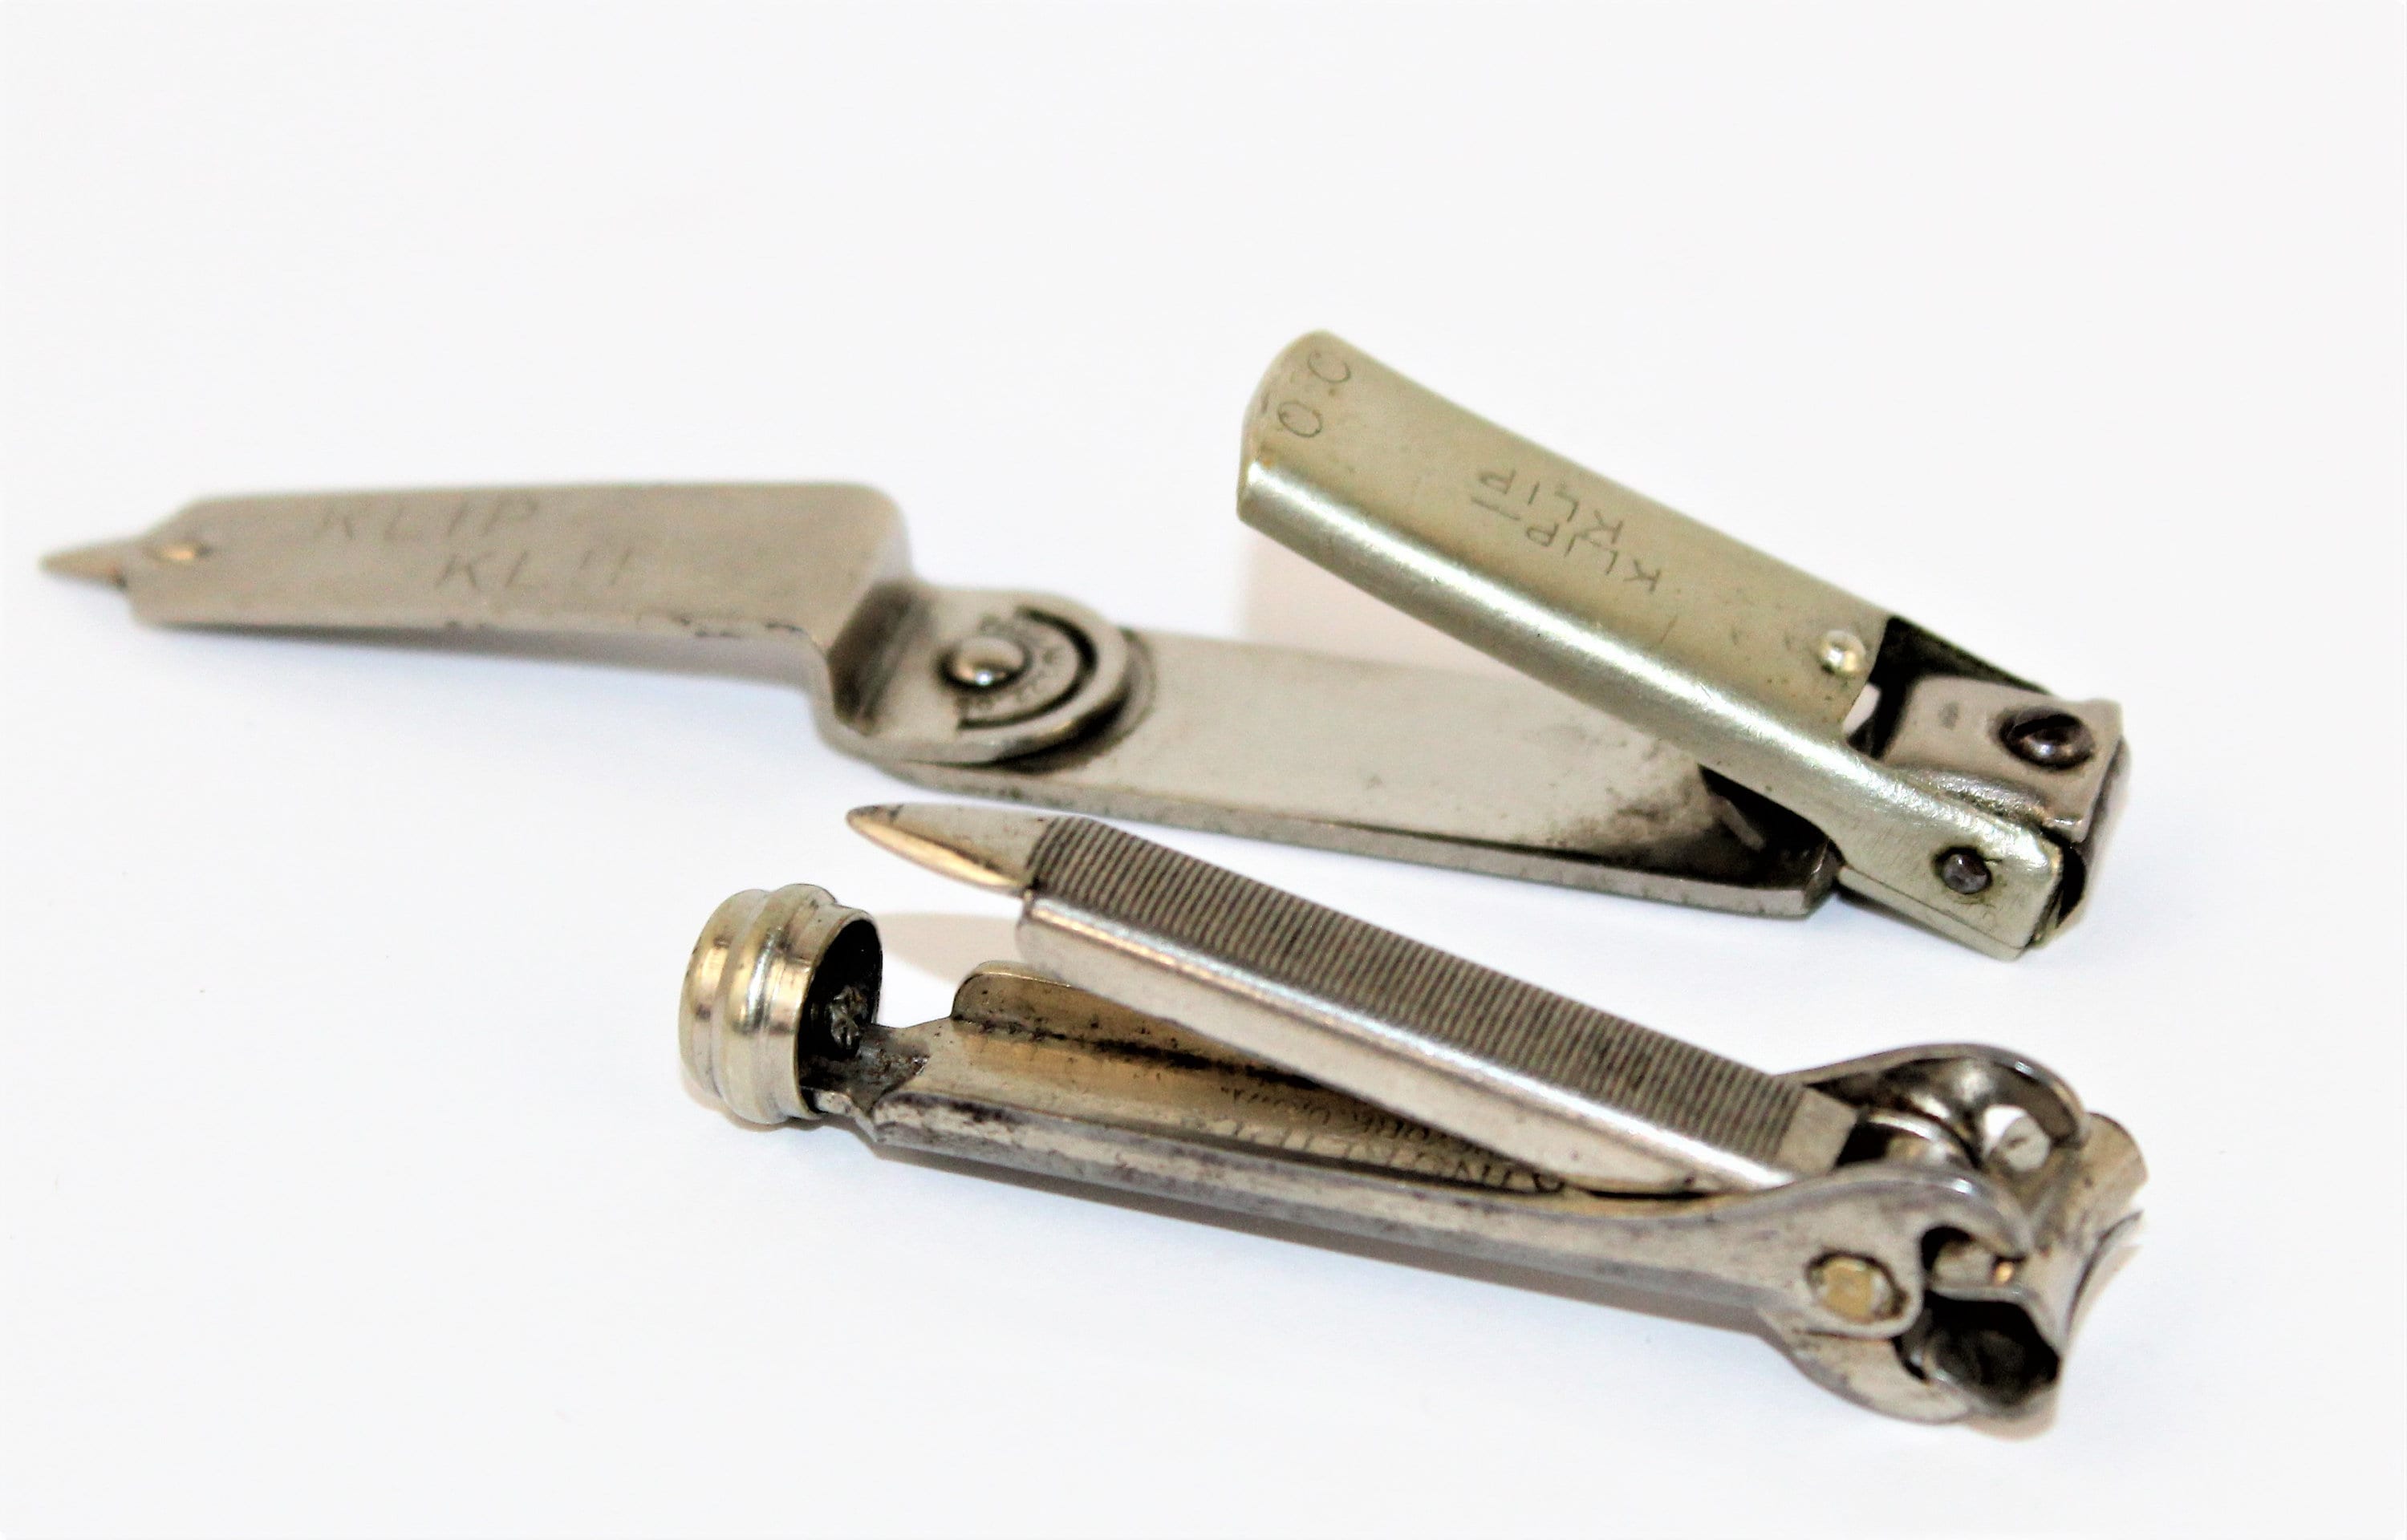 KLHIP  The Ultimate Nail Clipper – King's Crown 1774